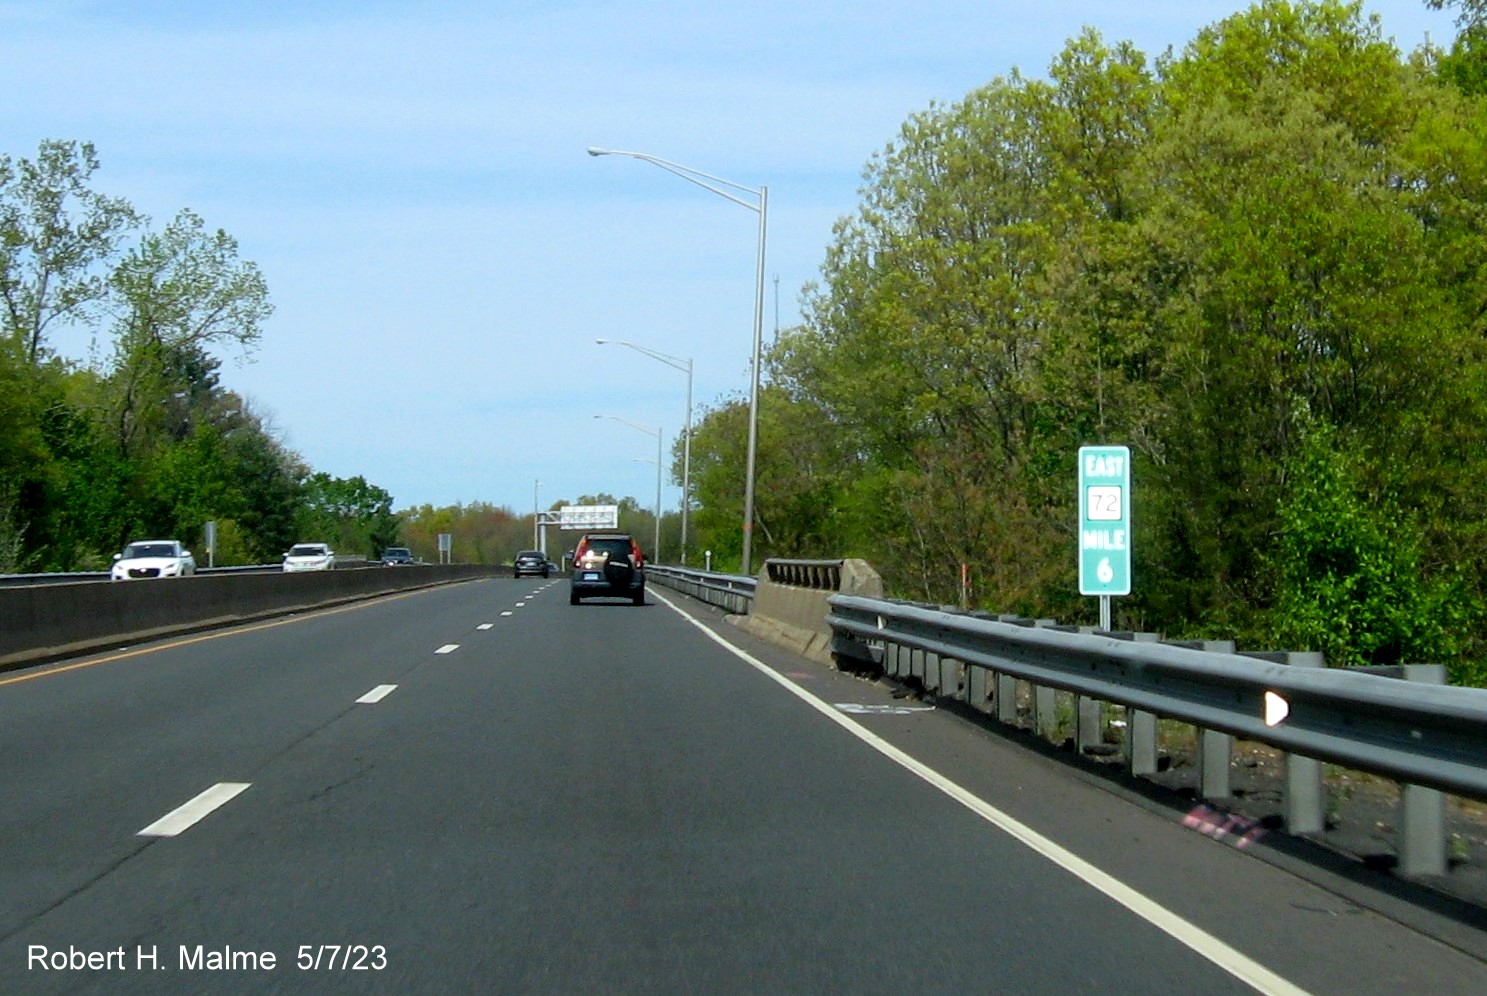 Image of recently placed Mile 5 marker on CT 72 East in Bristol, May 2023